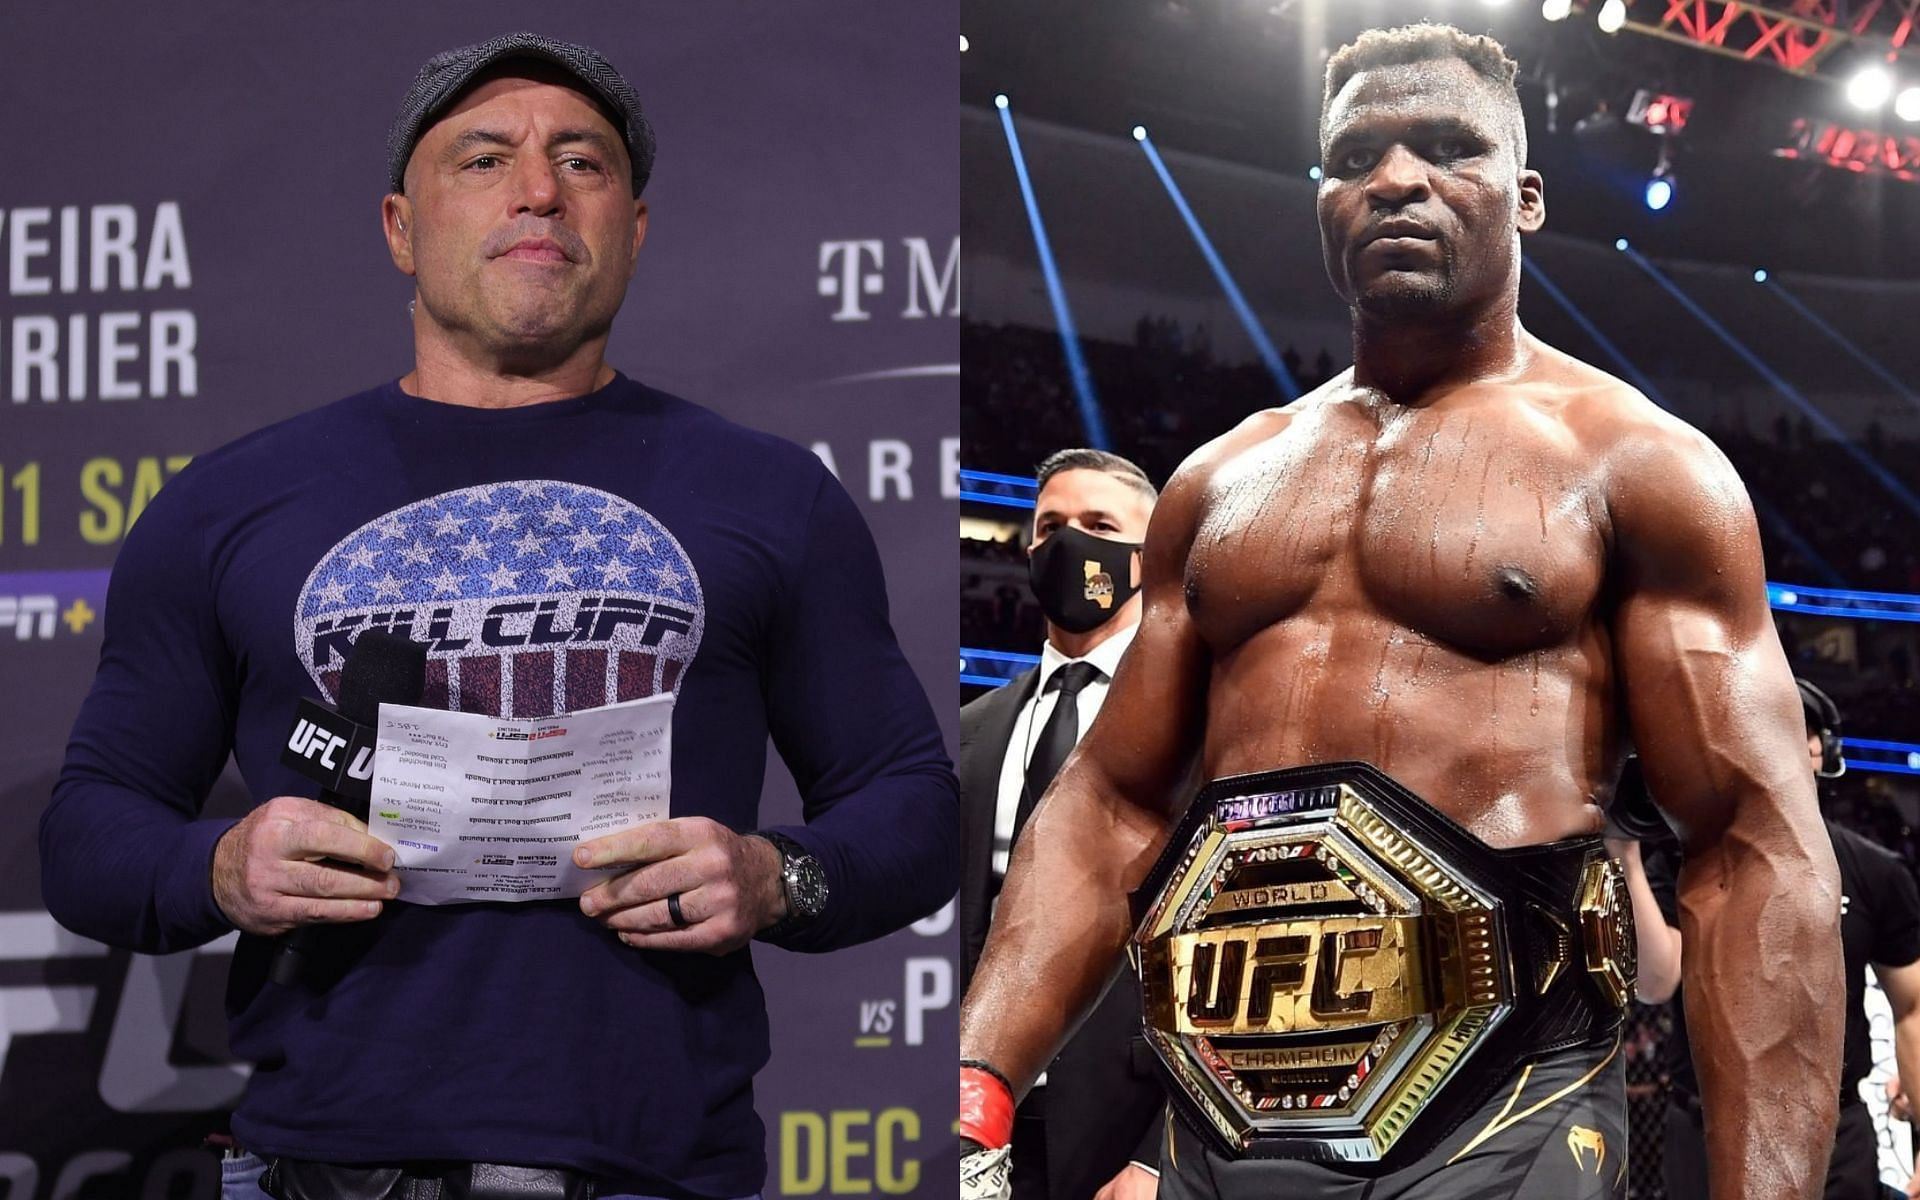 Joe Rogan (left) and Francis Ngannou (right) [Photo credit: @ufc on Instagram]